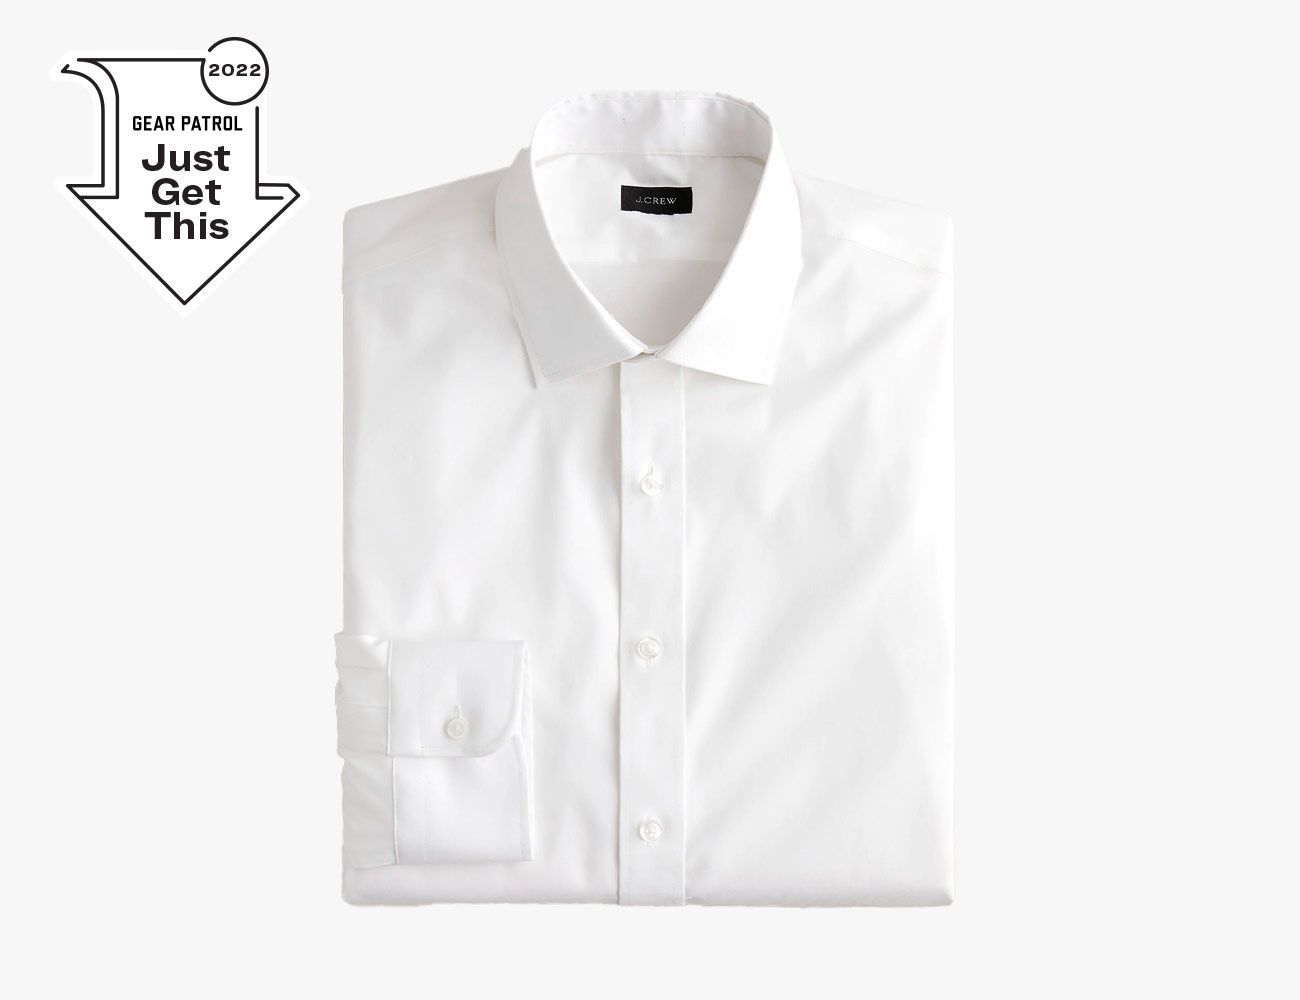 White Dress Shirts You Can Wear Under Any Suit